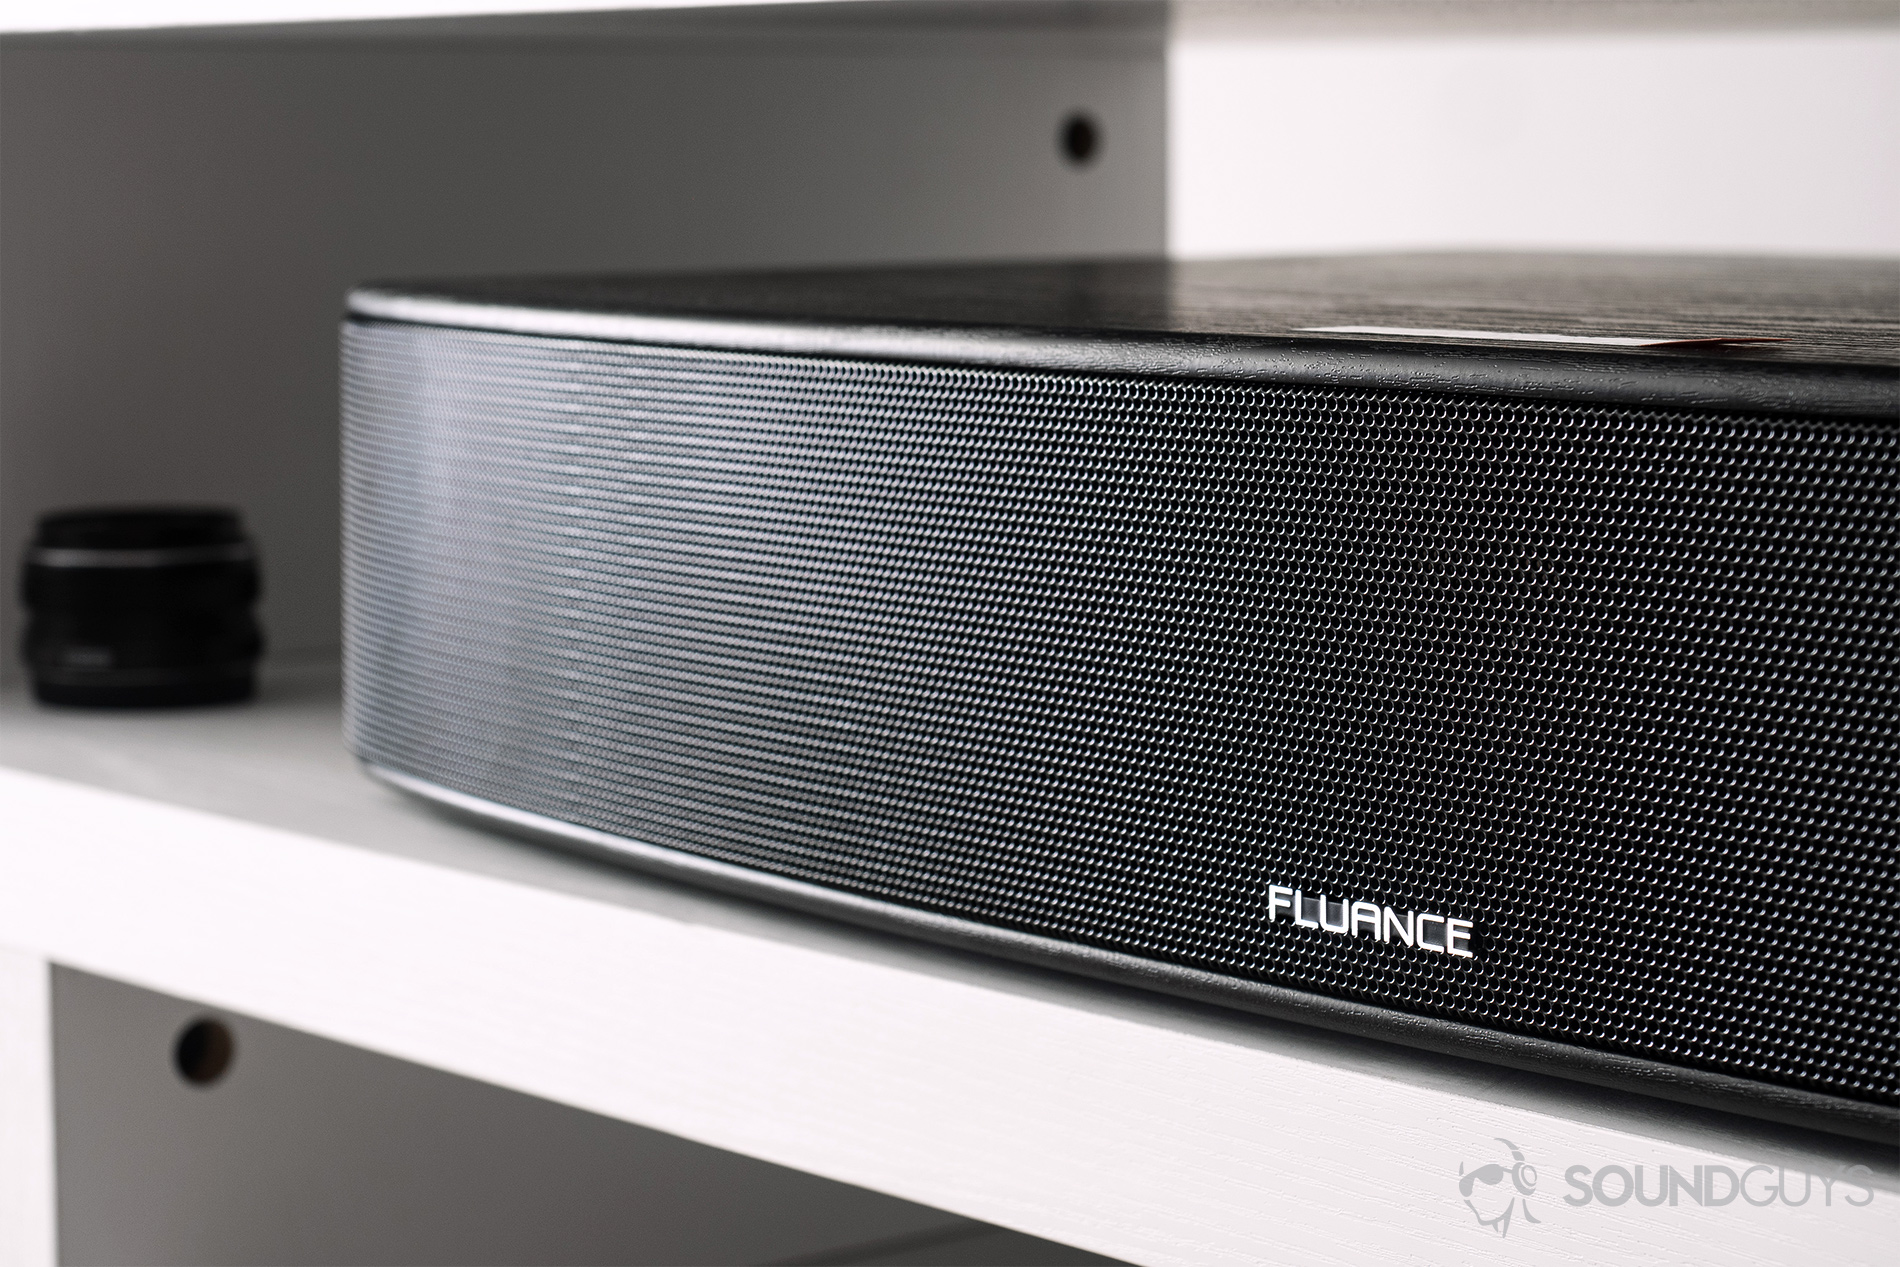 Fluance AB40 review: An angled image of the soundbase on a white wooden TV stand.